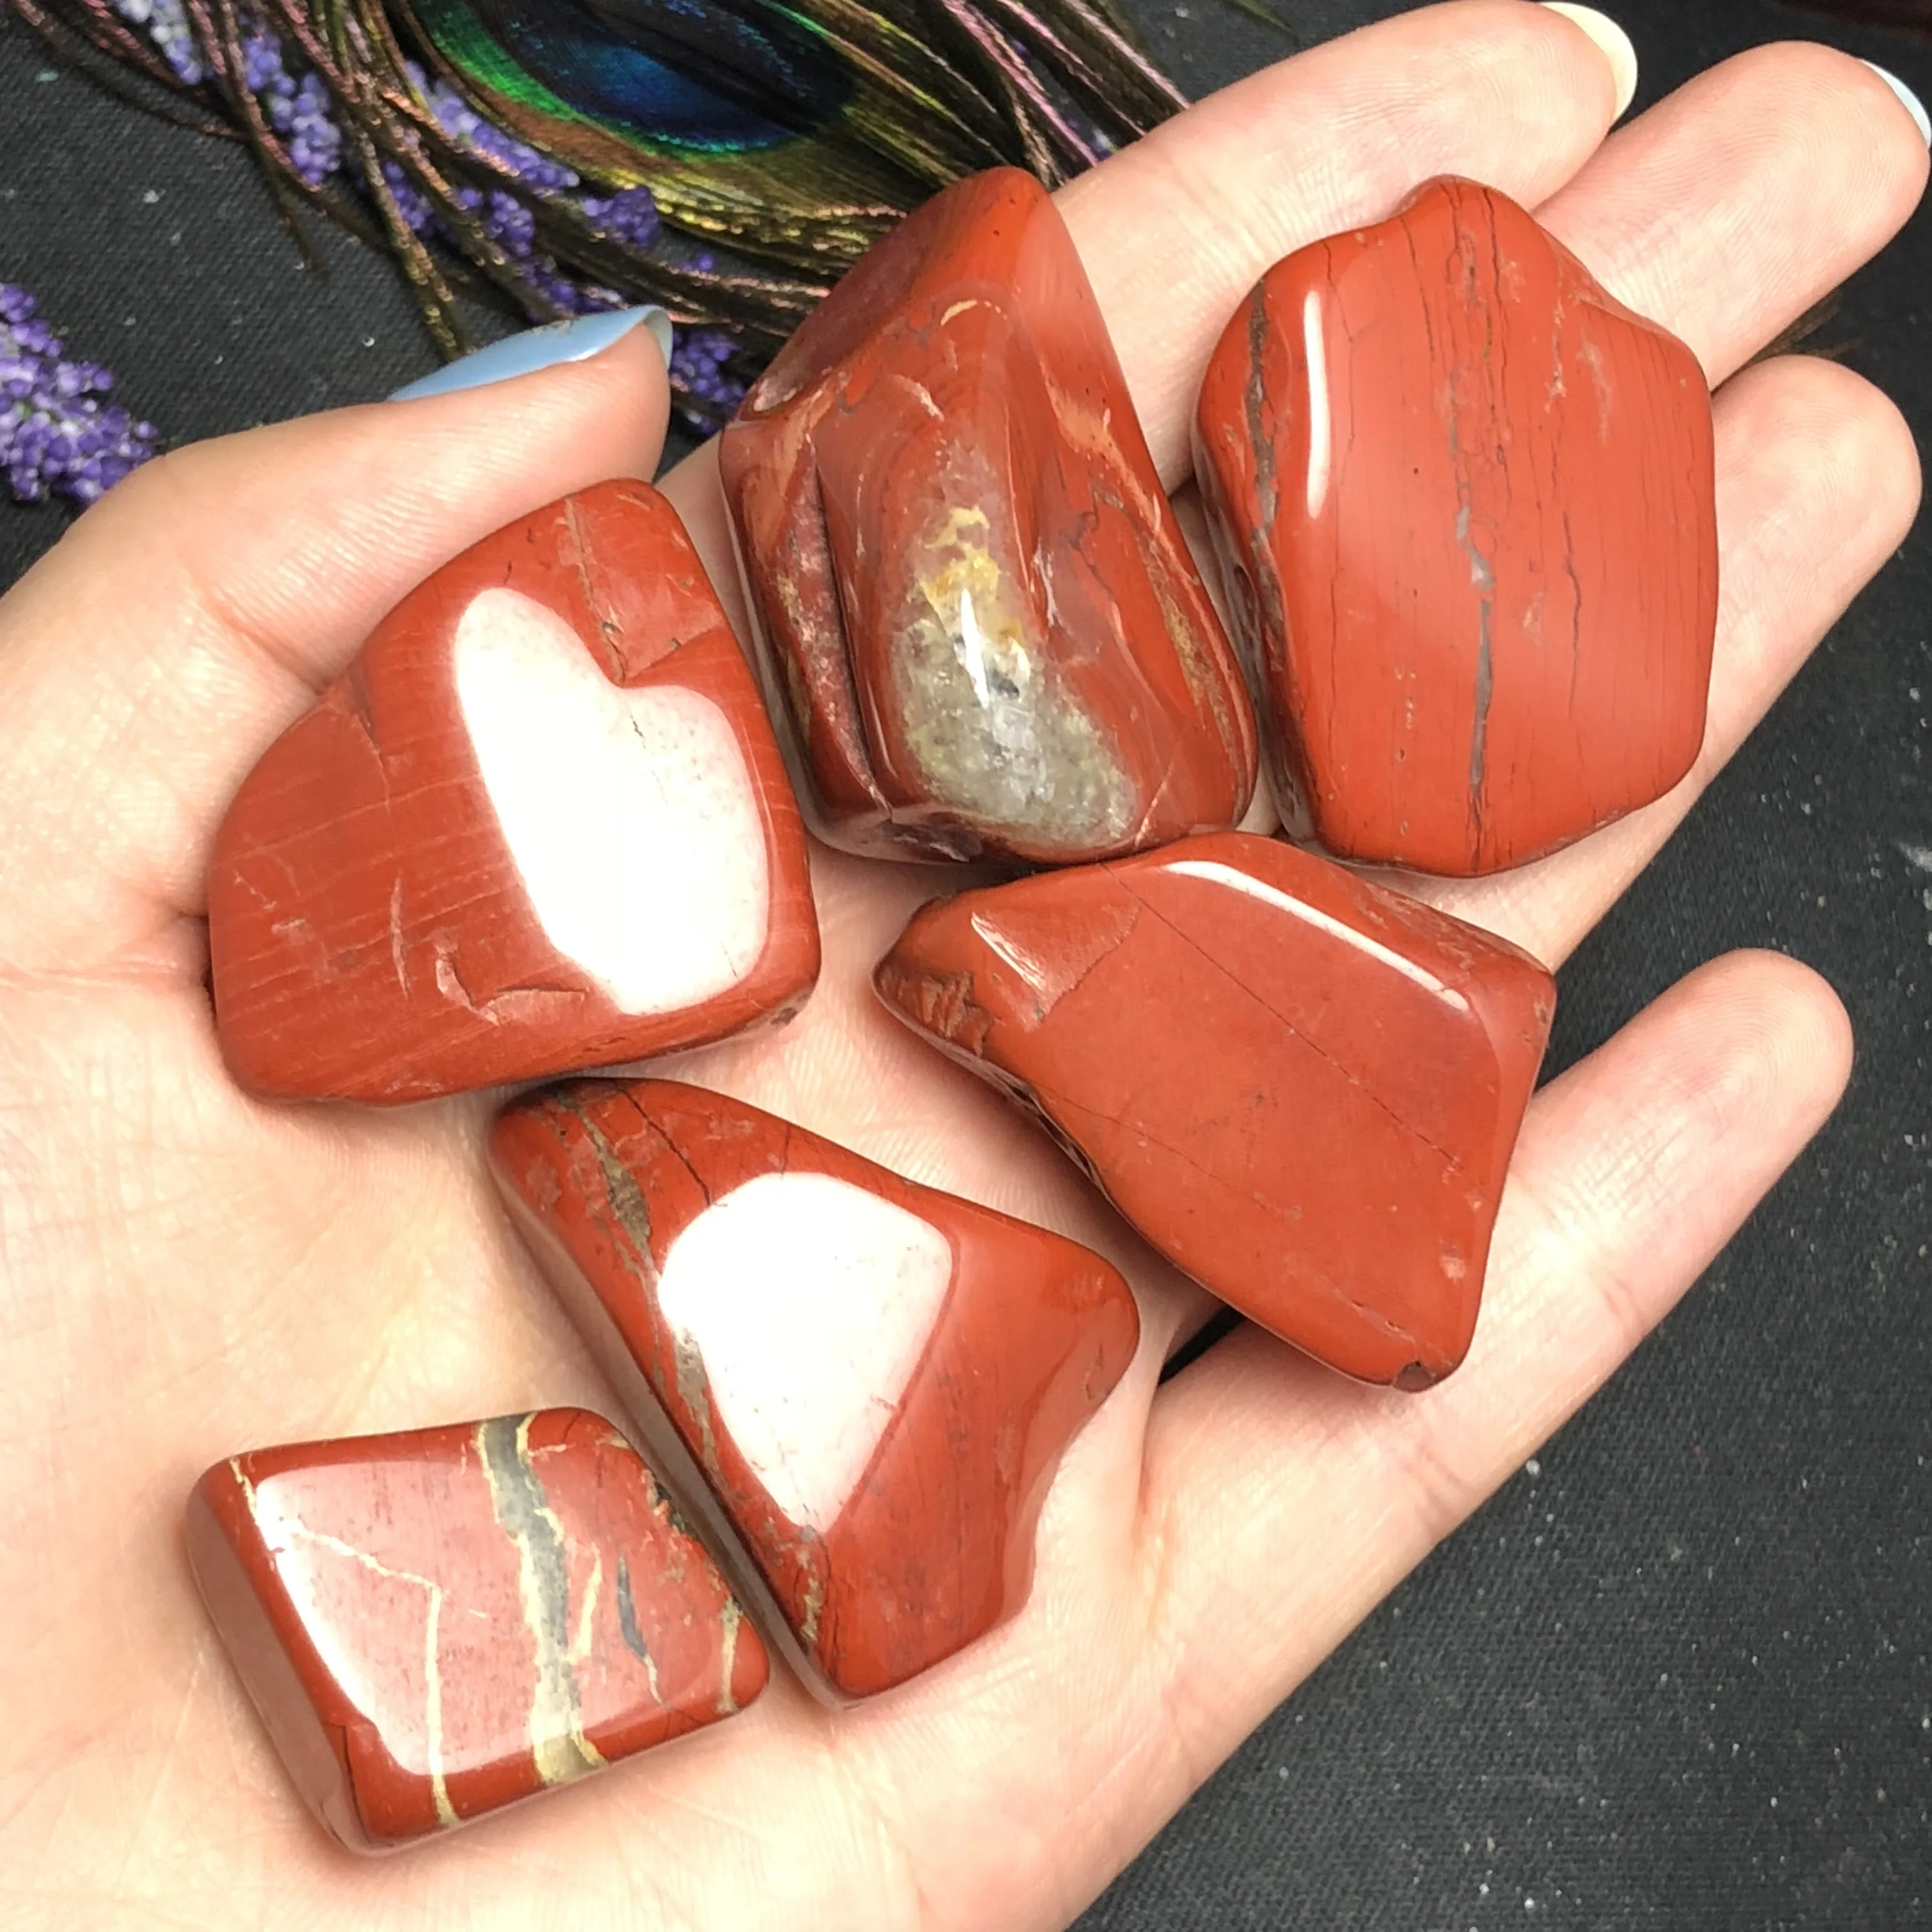 6pcs Beautiful Natural Red Jade Crystal Tumbled Stones Polished Stone Great  for Meditation Chakra Reiki Stone As Gift|Stones| - AliExpress